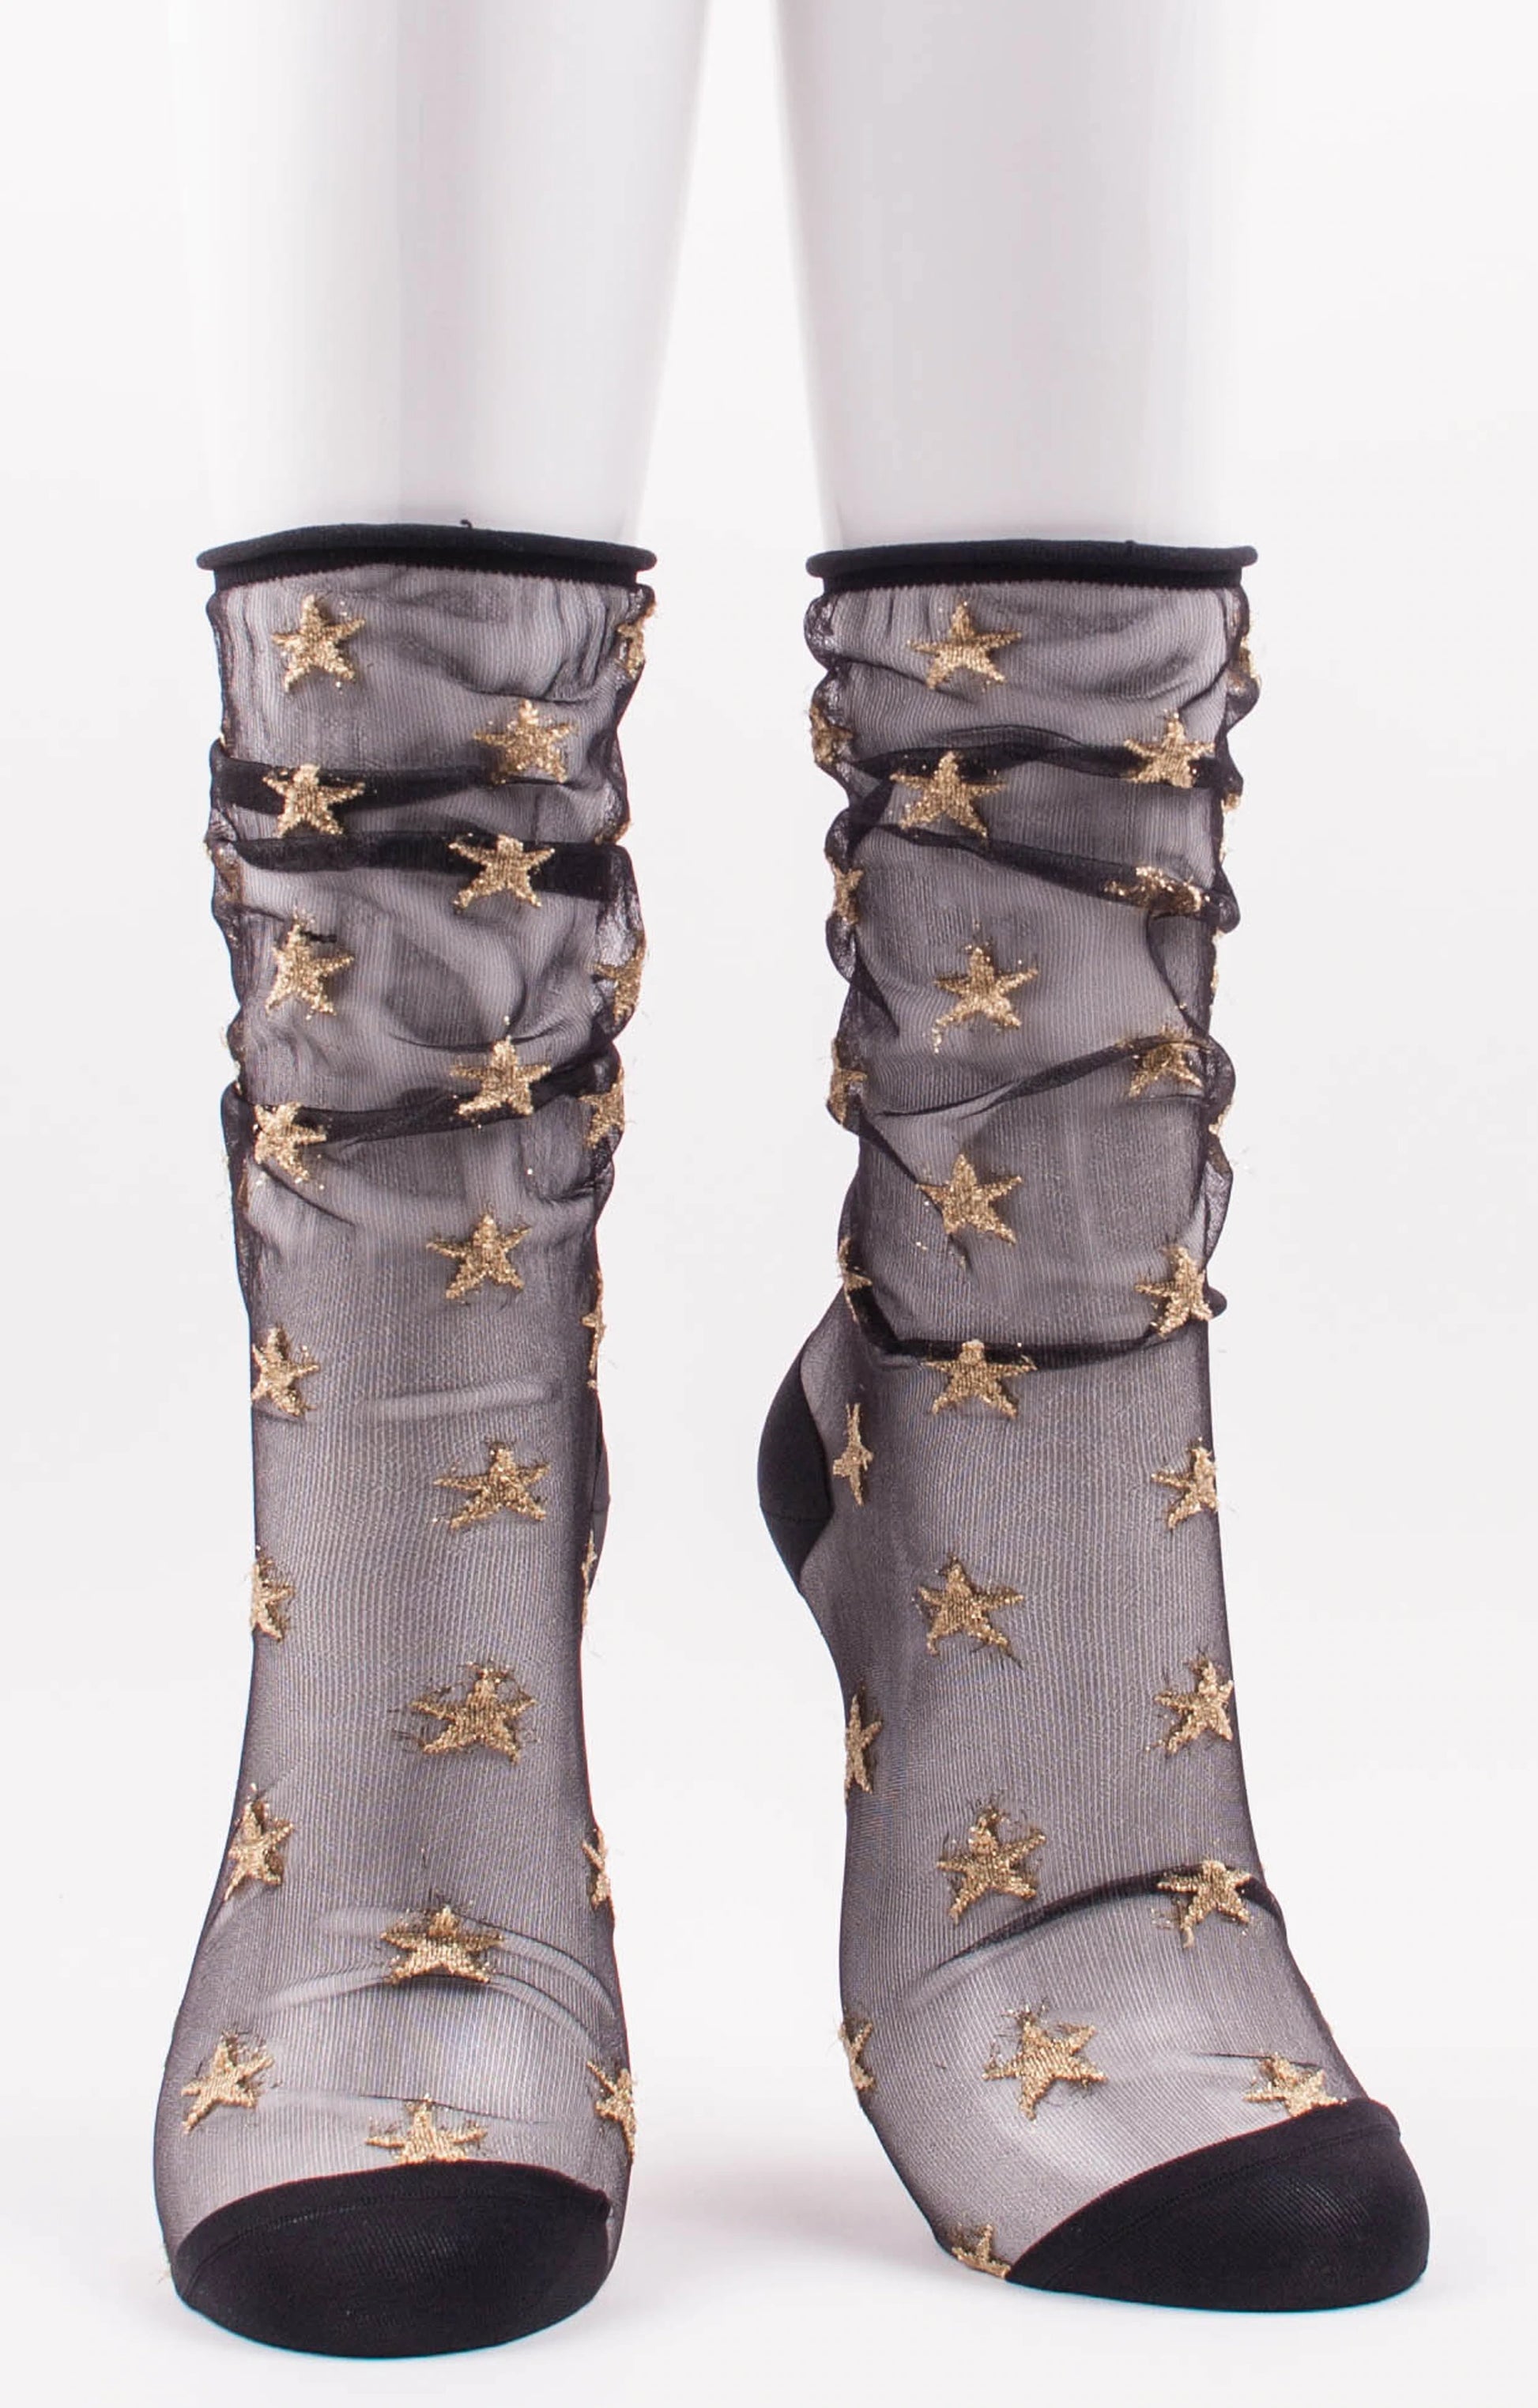 TABBISOCKS brand Sheer Star Tulle Socks in BLACK GOLD color with gold star embroidery scattered on transparent black fabric design